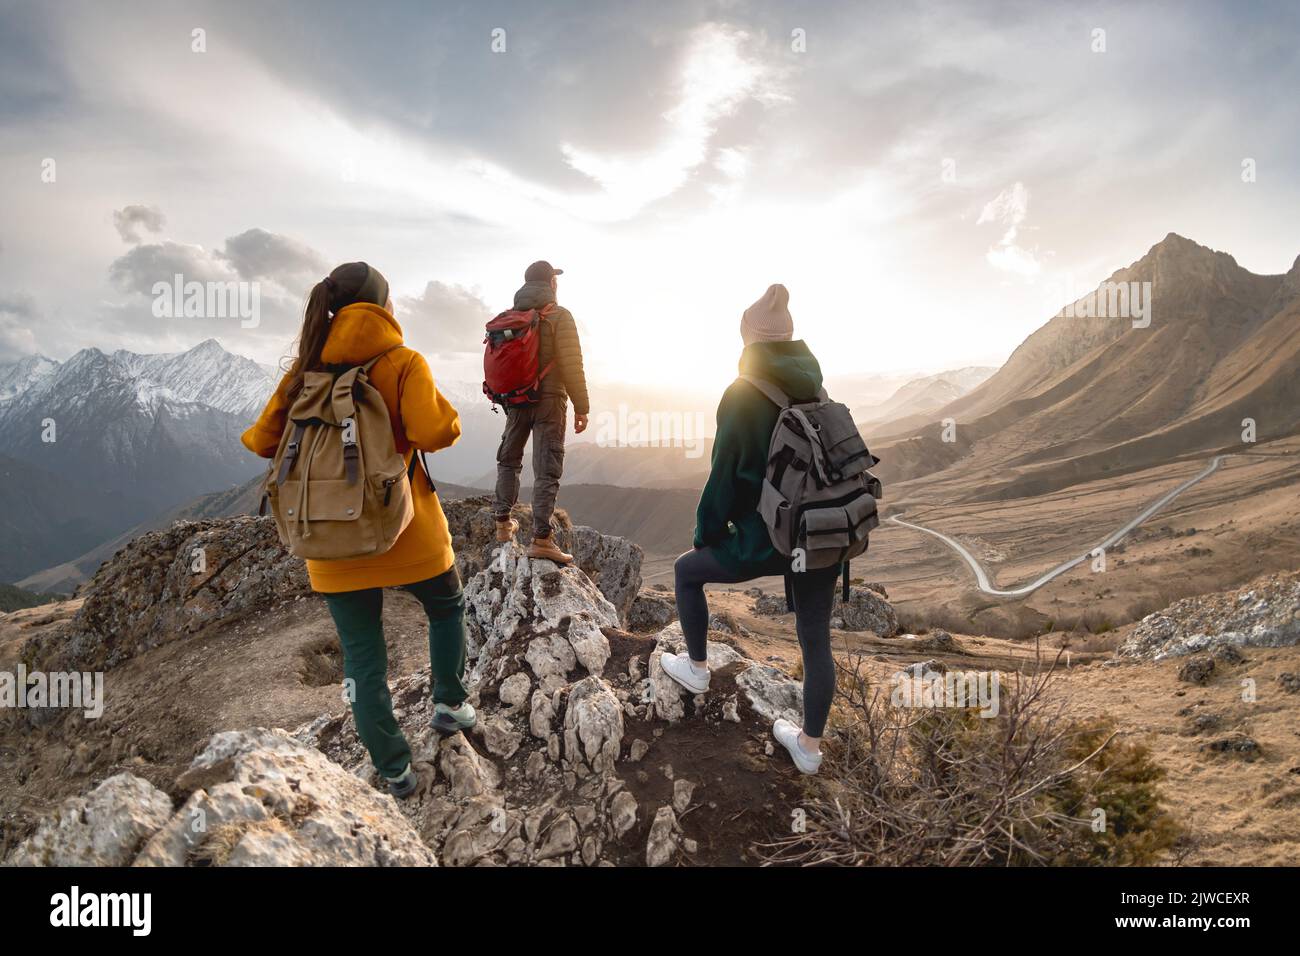 Group of hikers or tourists with backpacks walks in mountains at sunset Stock Photo